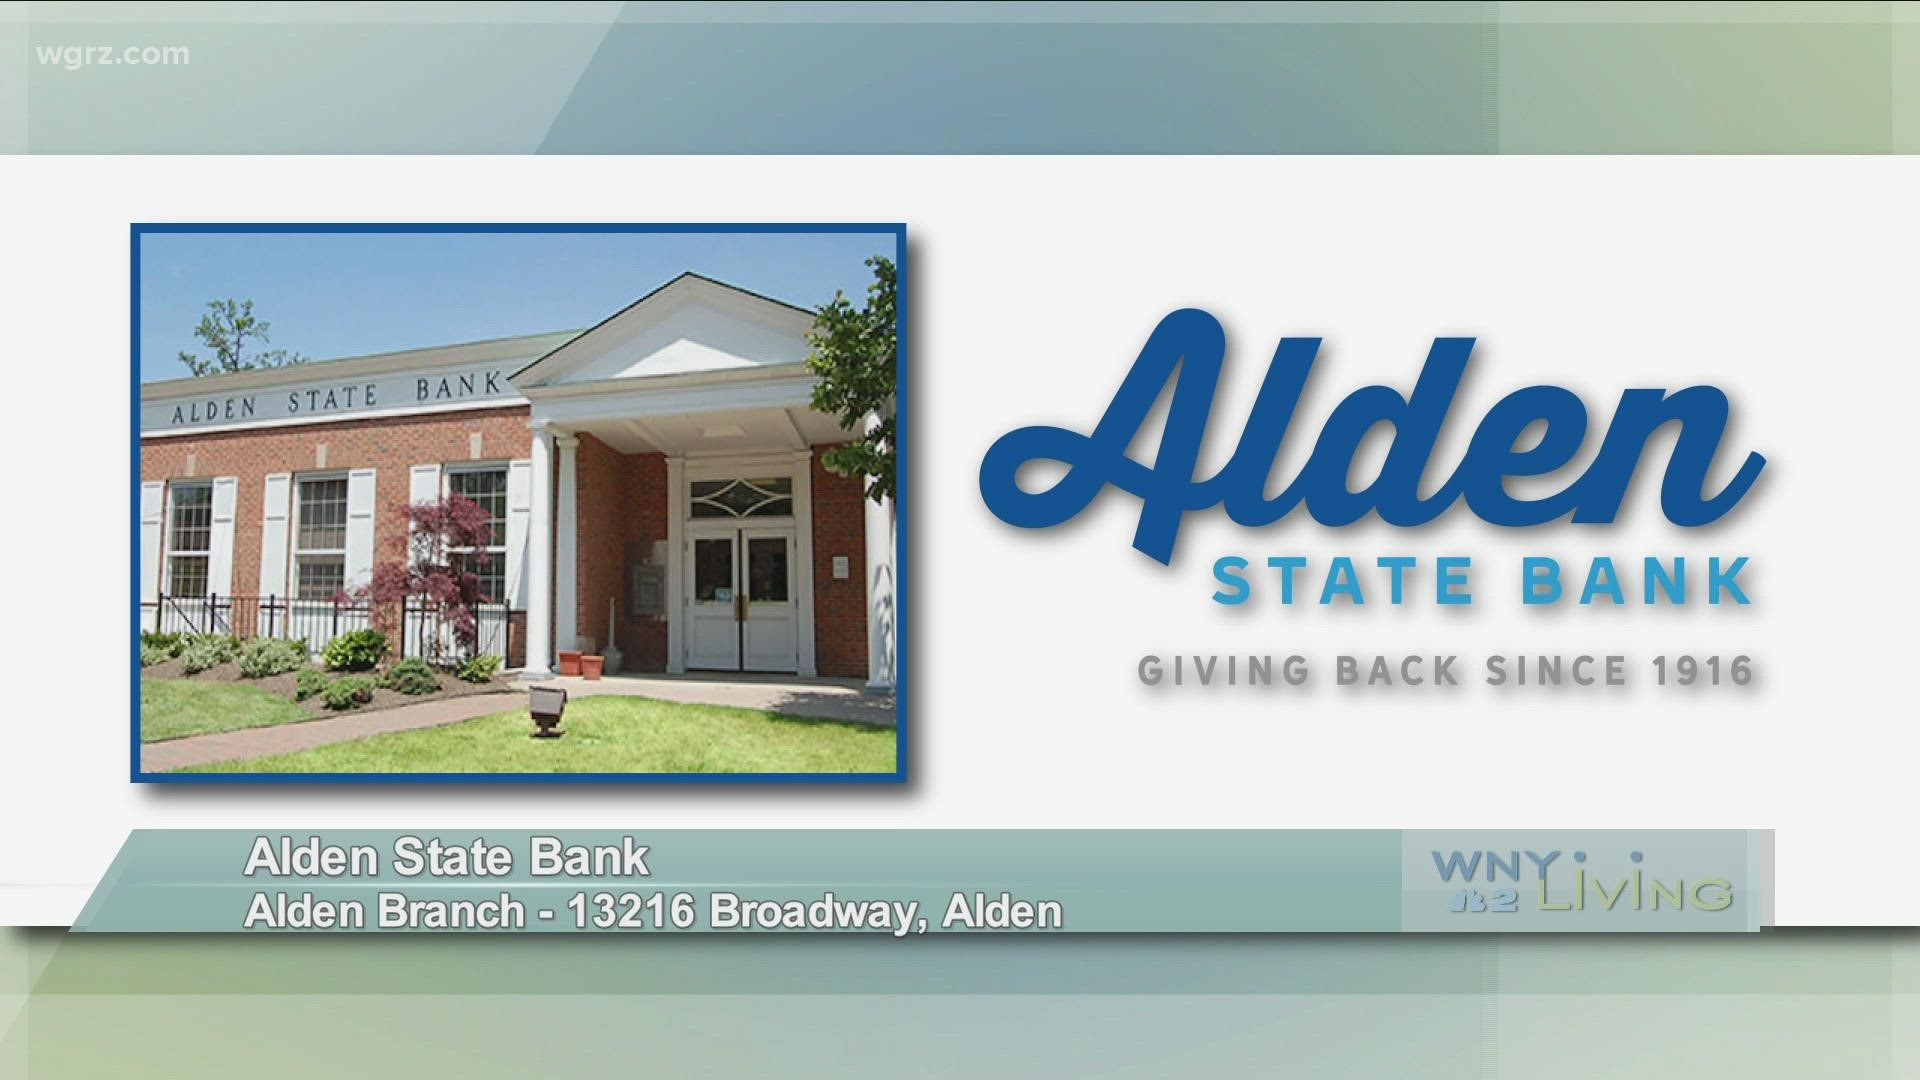 WNY Living - January 15 - Alden State Bank (THIS VIDEO IS SPONSORED BY ALDEN STATE BANK)